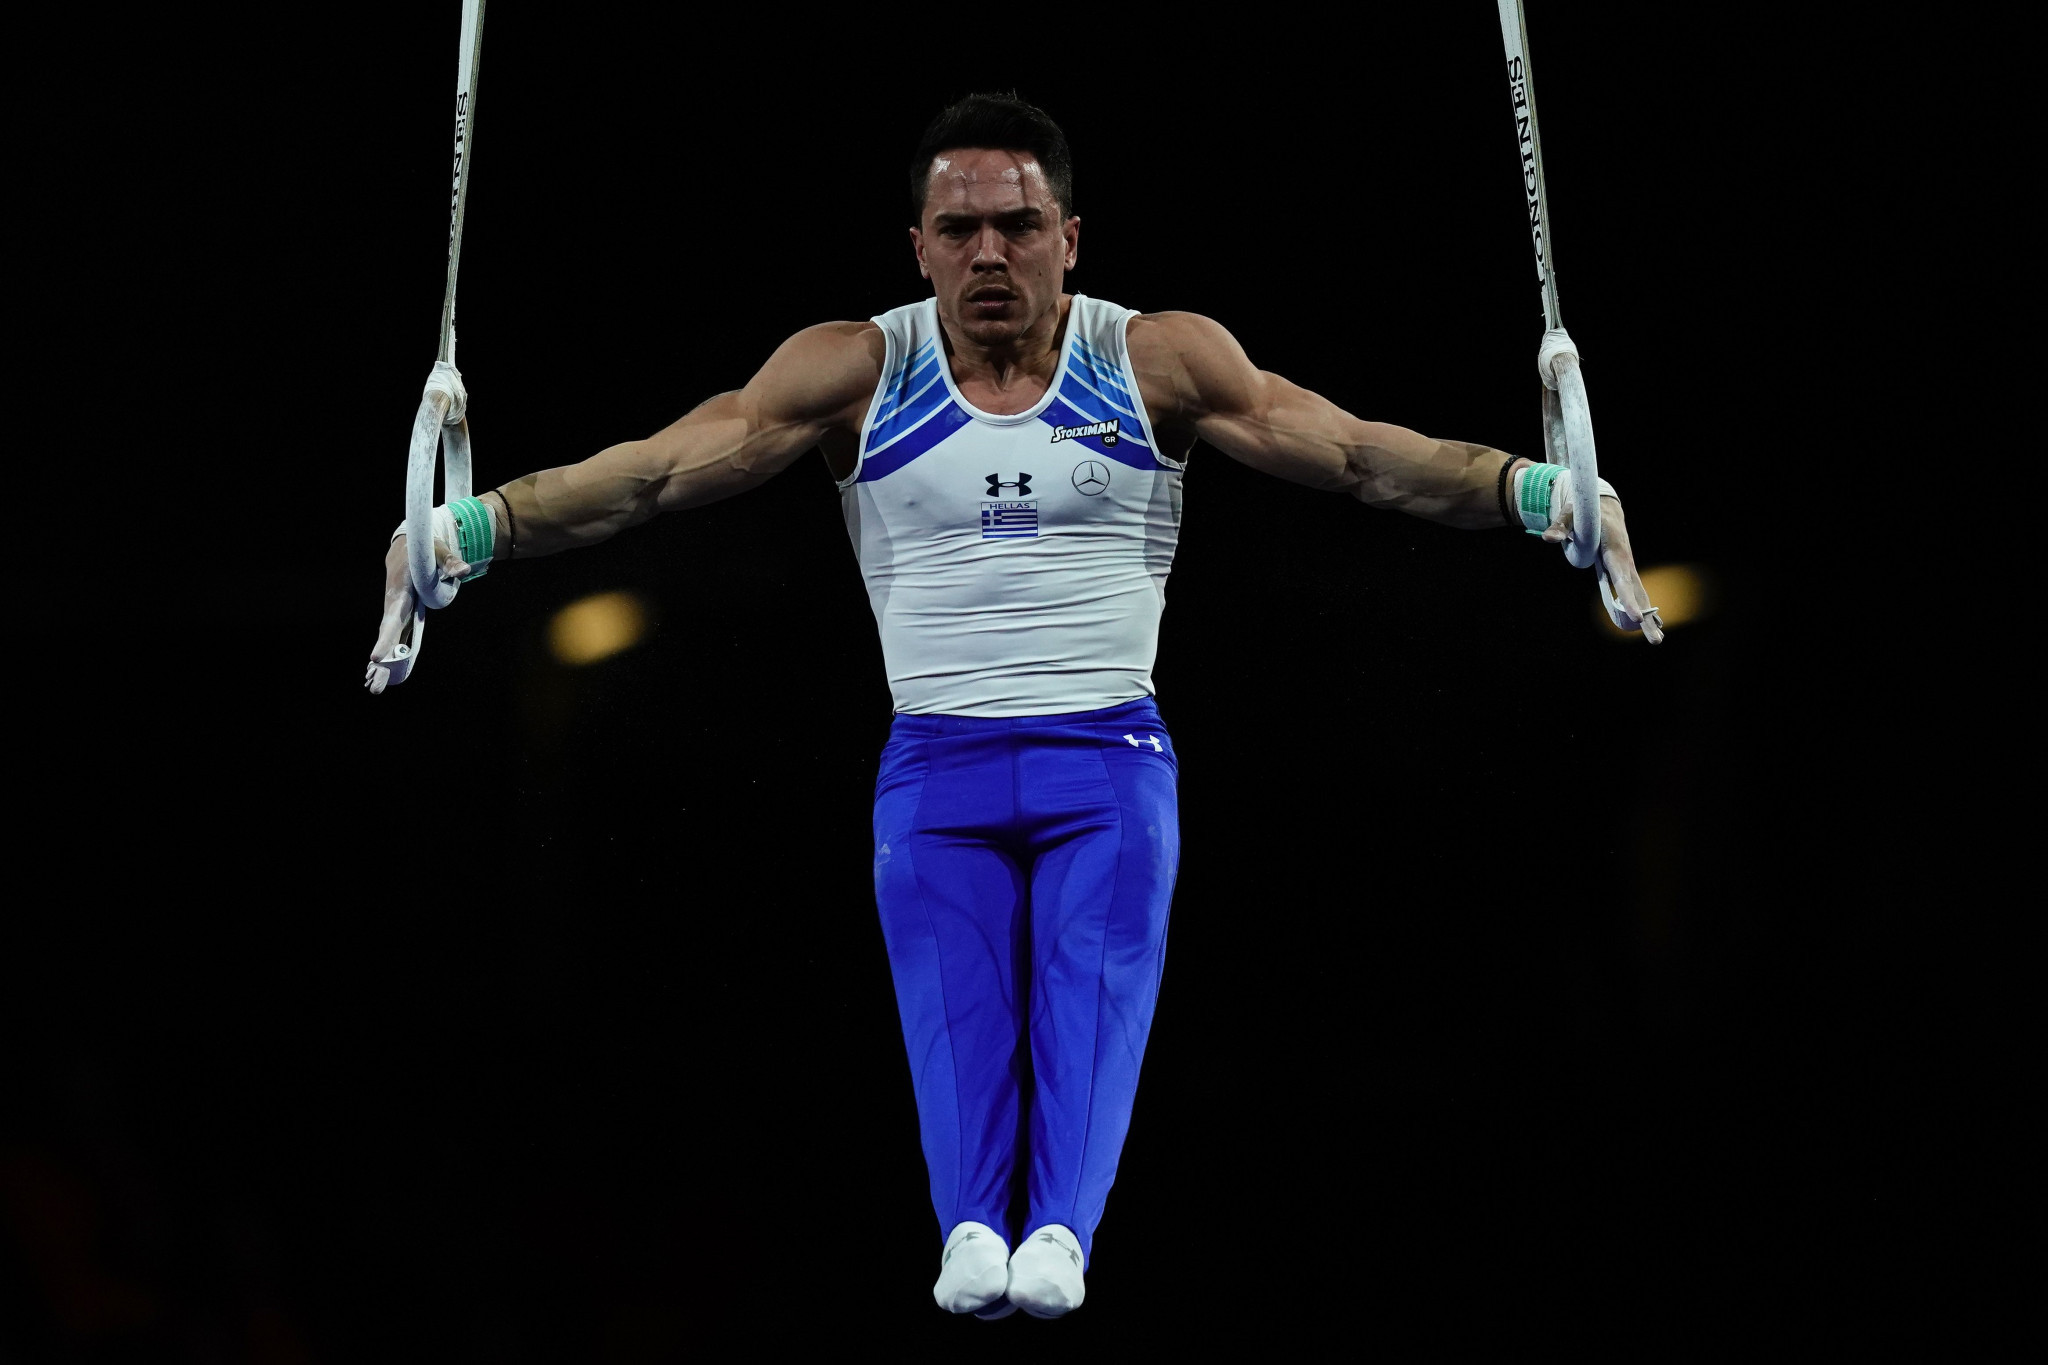 Olympic champion Petrounias tops men's rings qualification as FIG World Cup begins in Melbourne